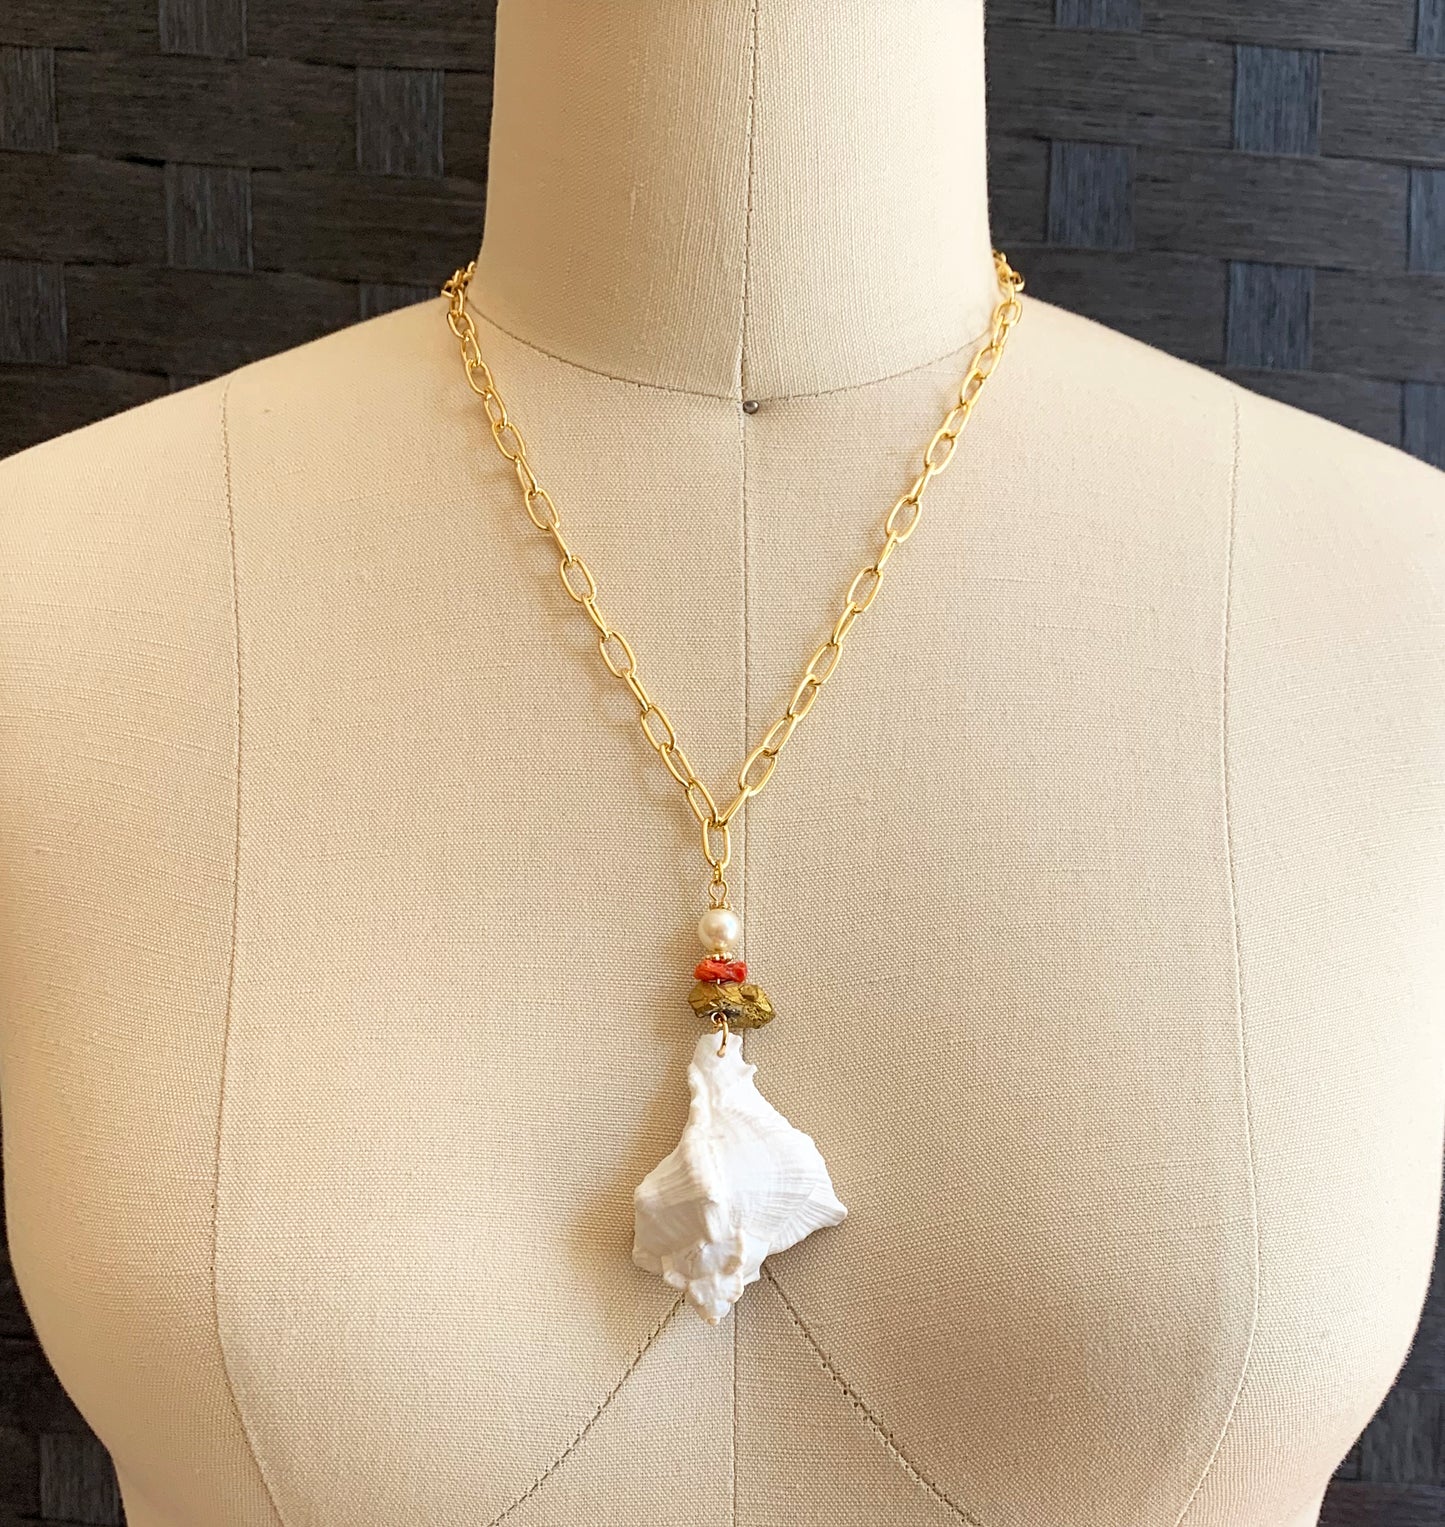 Handmade Necklace - White Conch Seashell Necklace with Pearl, Red Coral & Gold Quartz Beads, 18K Gold Plated Paperclip Chain